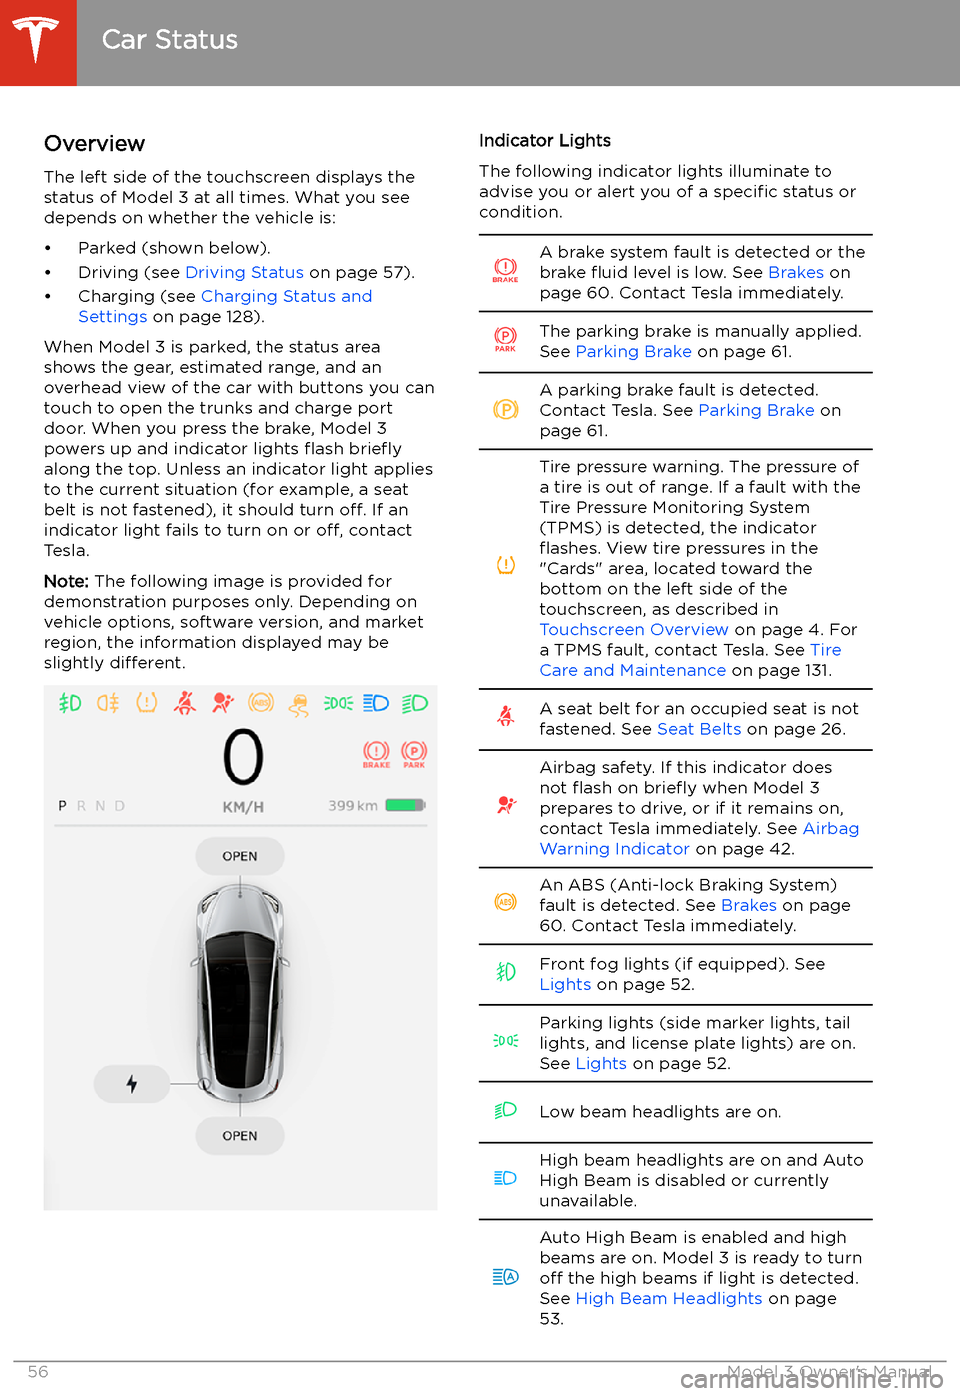 TESLA MODEL 3 2019  Owners Manual (Europe) Car Status
Overview
The left side of the touchscreen displays the
status of Model 3 at all times. What you see
depends on whether the vehicle is:
